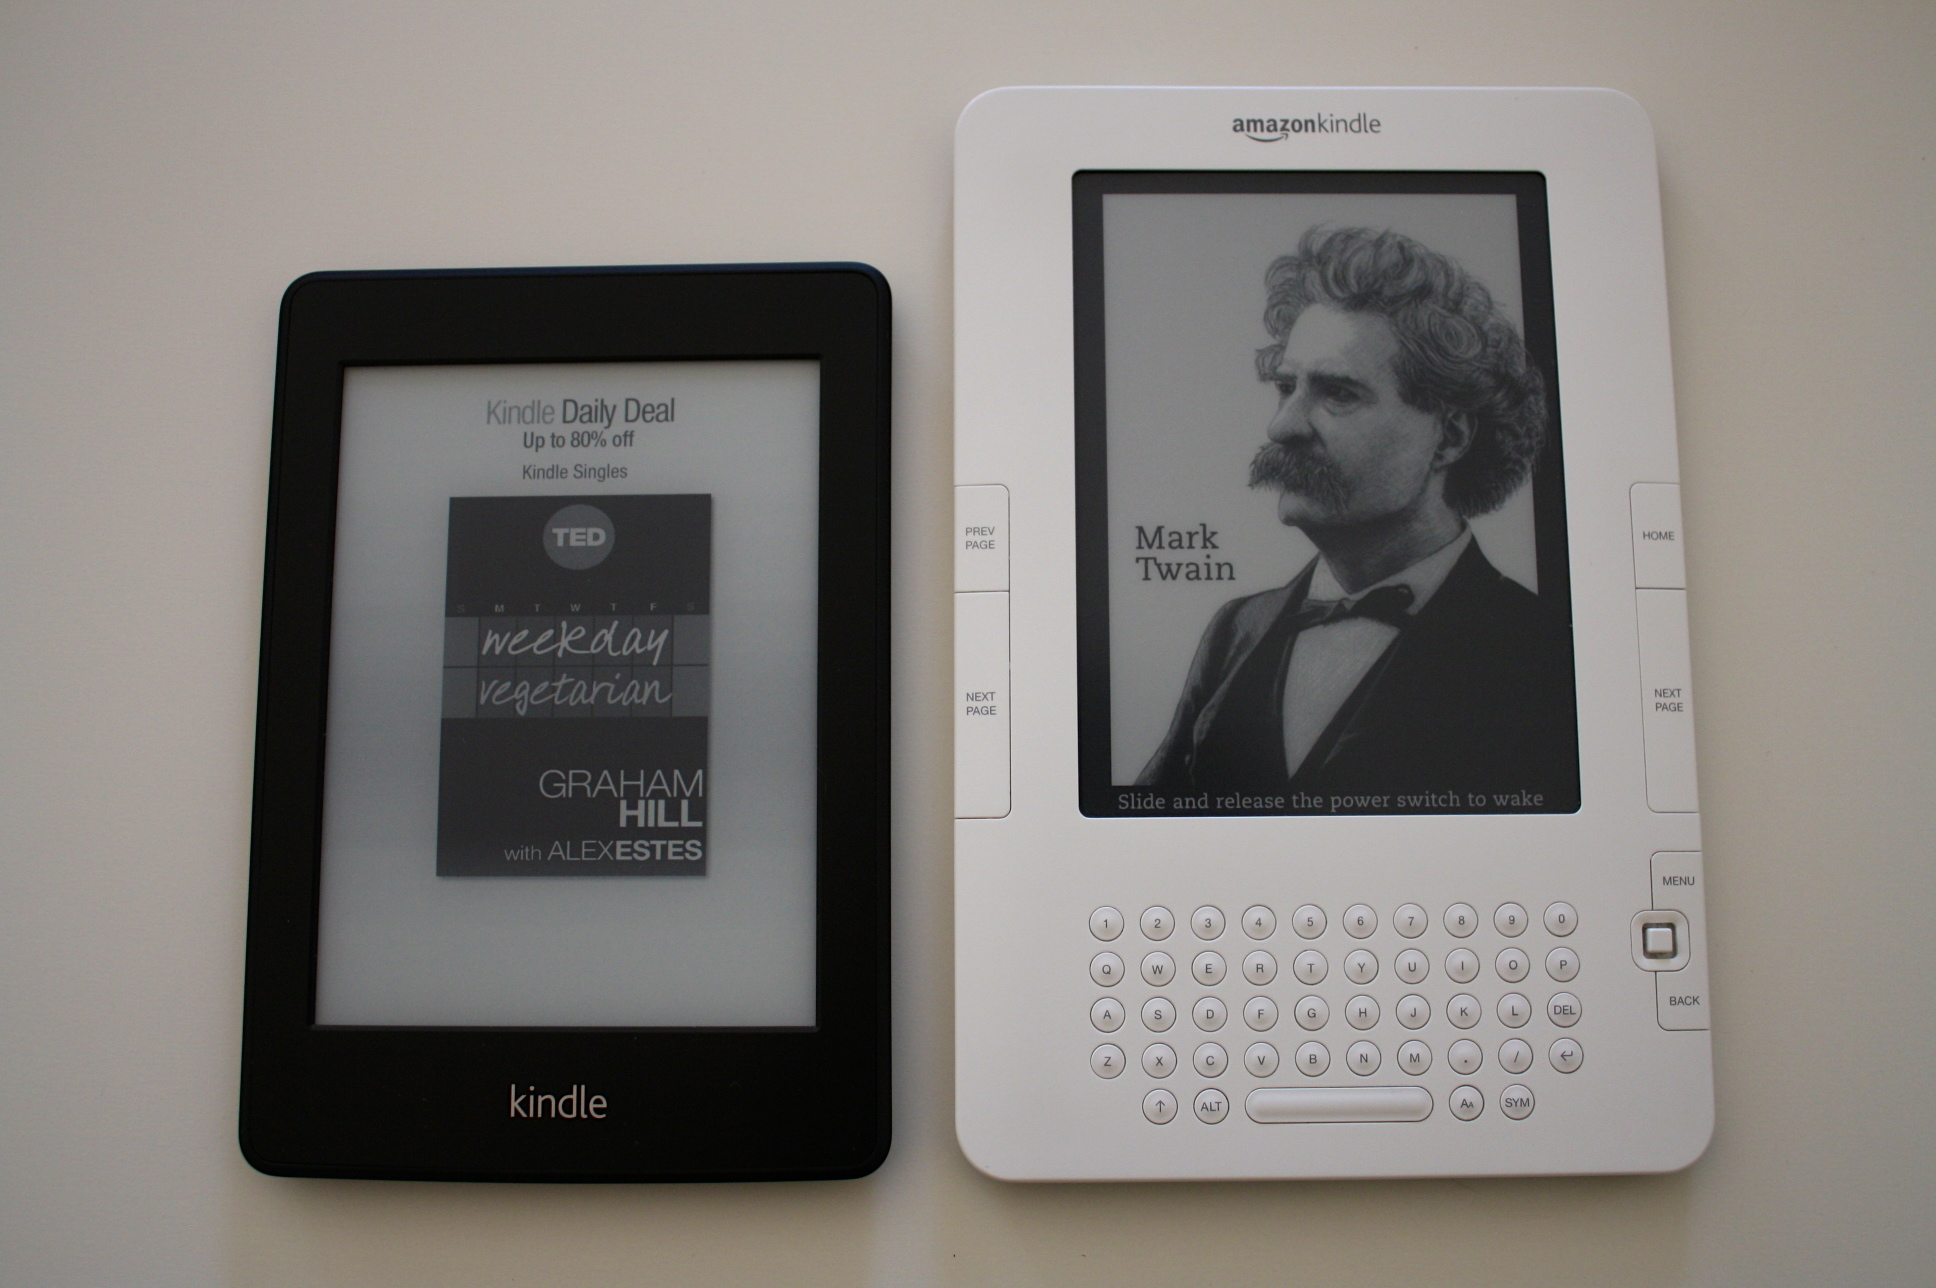 Brighter, sharper, and ad-filled: The Kindle Paperwhite review | Ars